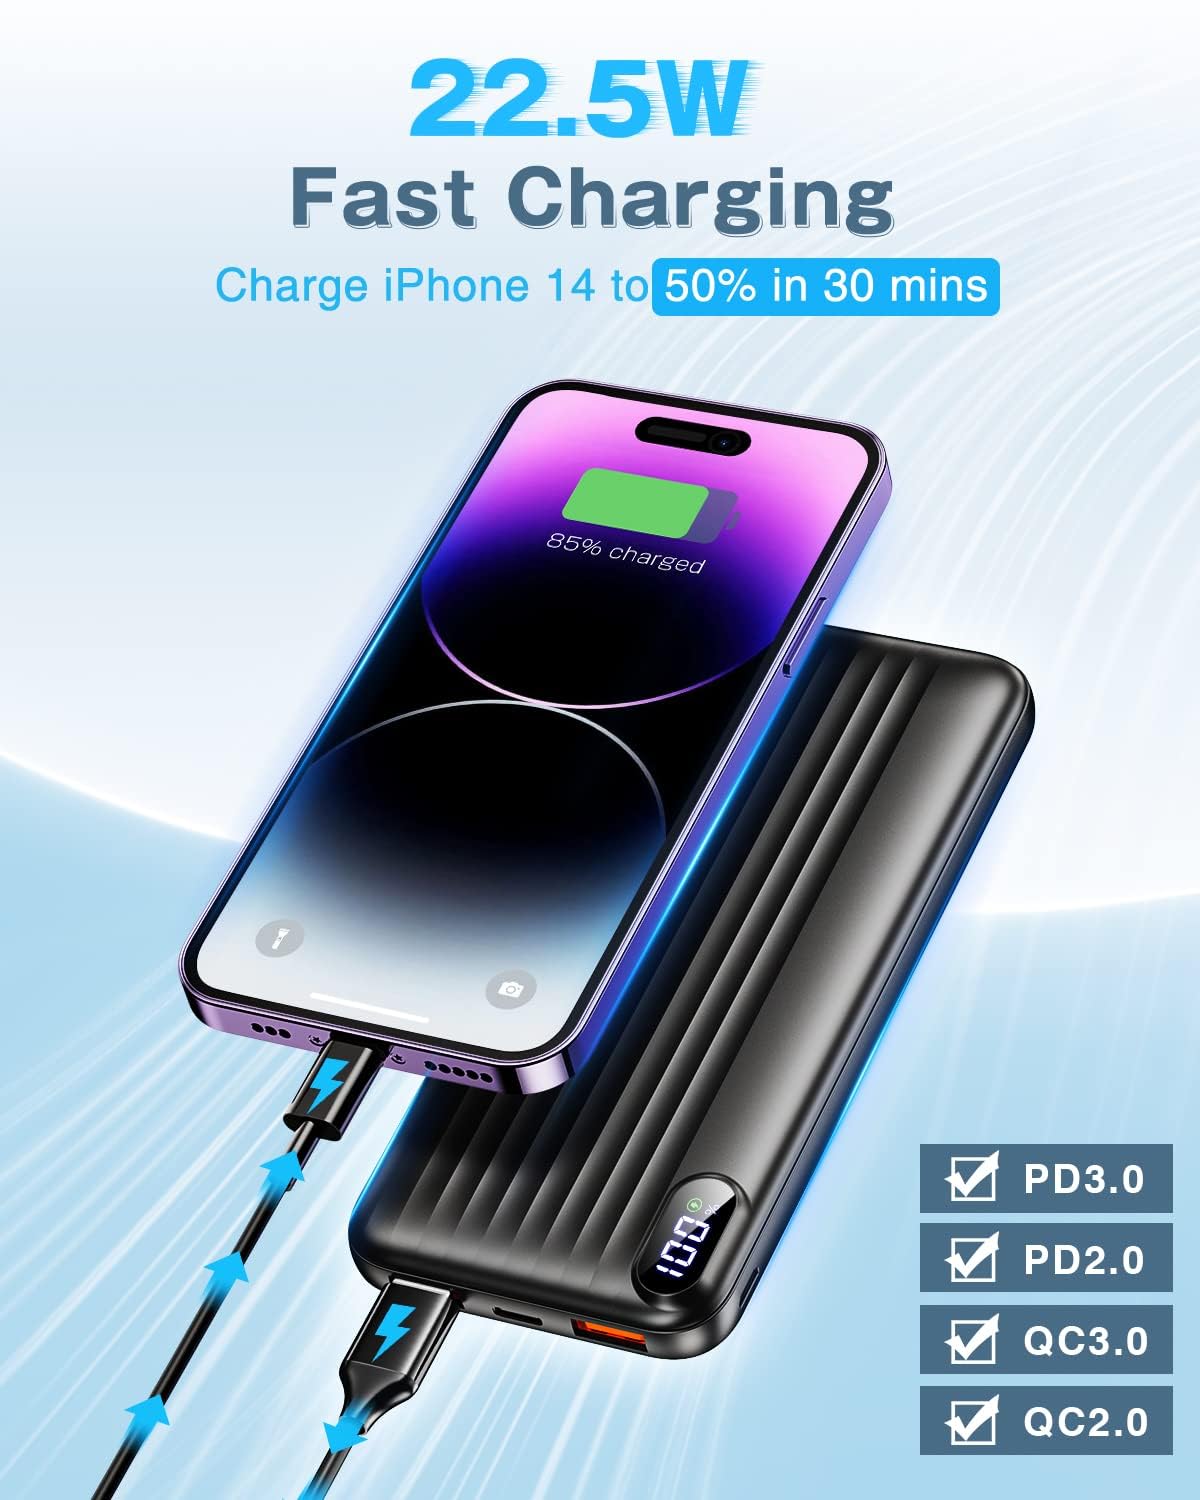 KEOLL Portable Charger 15000mAh Power Bank with 22.5W Fast Charging, LED Display Backup Battery 3 Output & 2 Input External Battery Packs, Phone Charger for iPhone 14/13 Pro/Galaxy/Pixel/Nexus/iPad